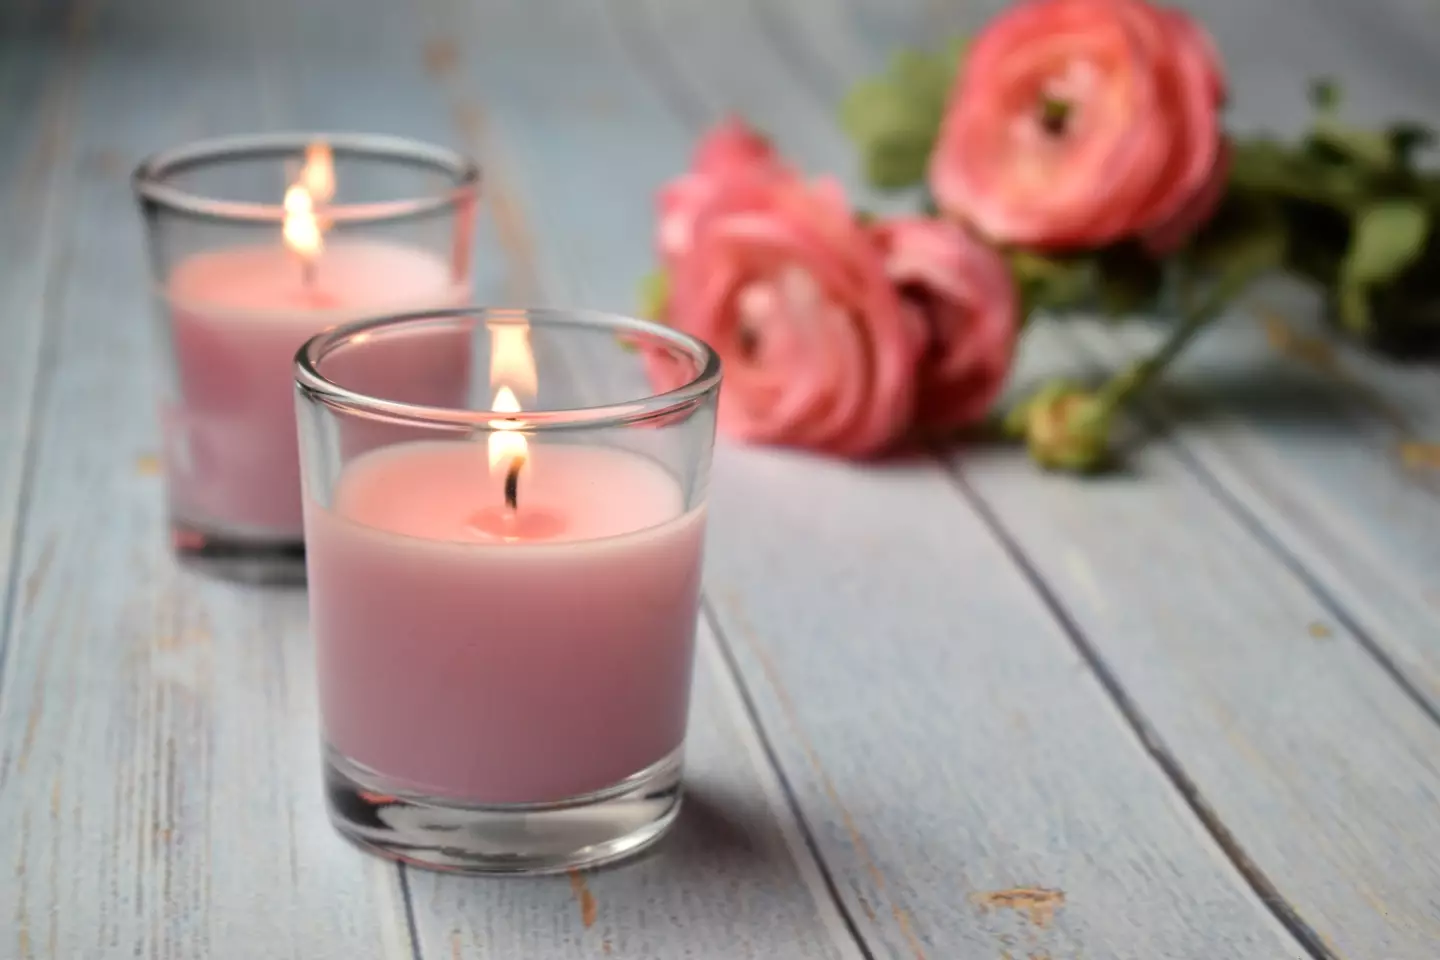 The social media medic has warned TikTok users about the harmful toxins in scented candles.